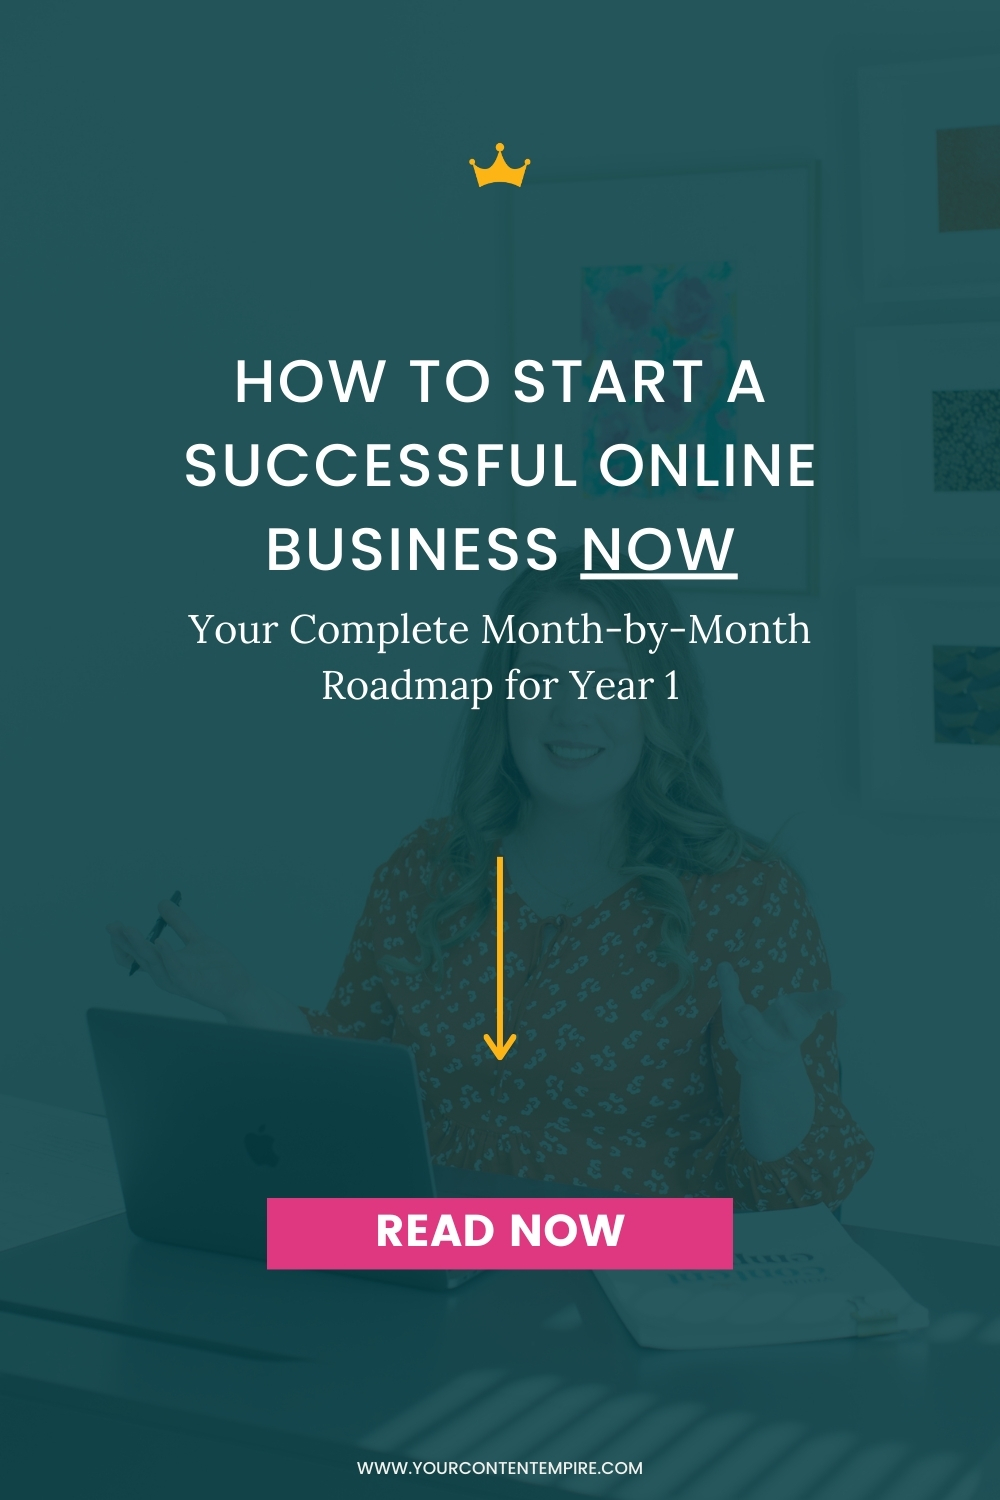 How to Start an Online Business Now - Your Year 1 Online Business Roadmap